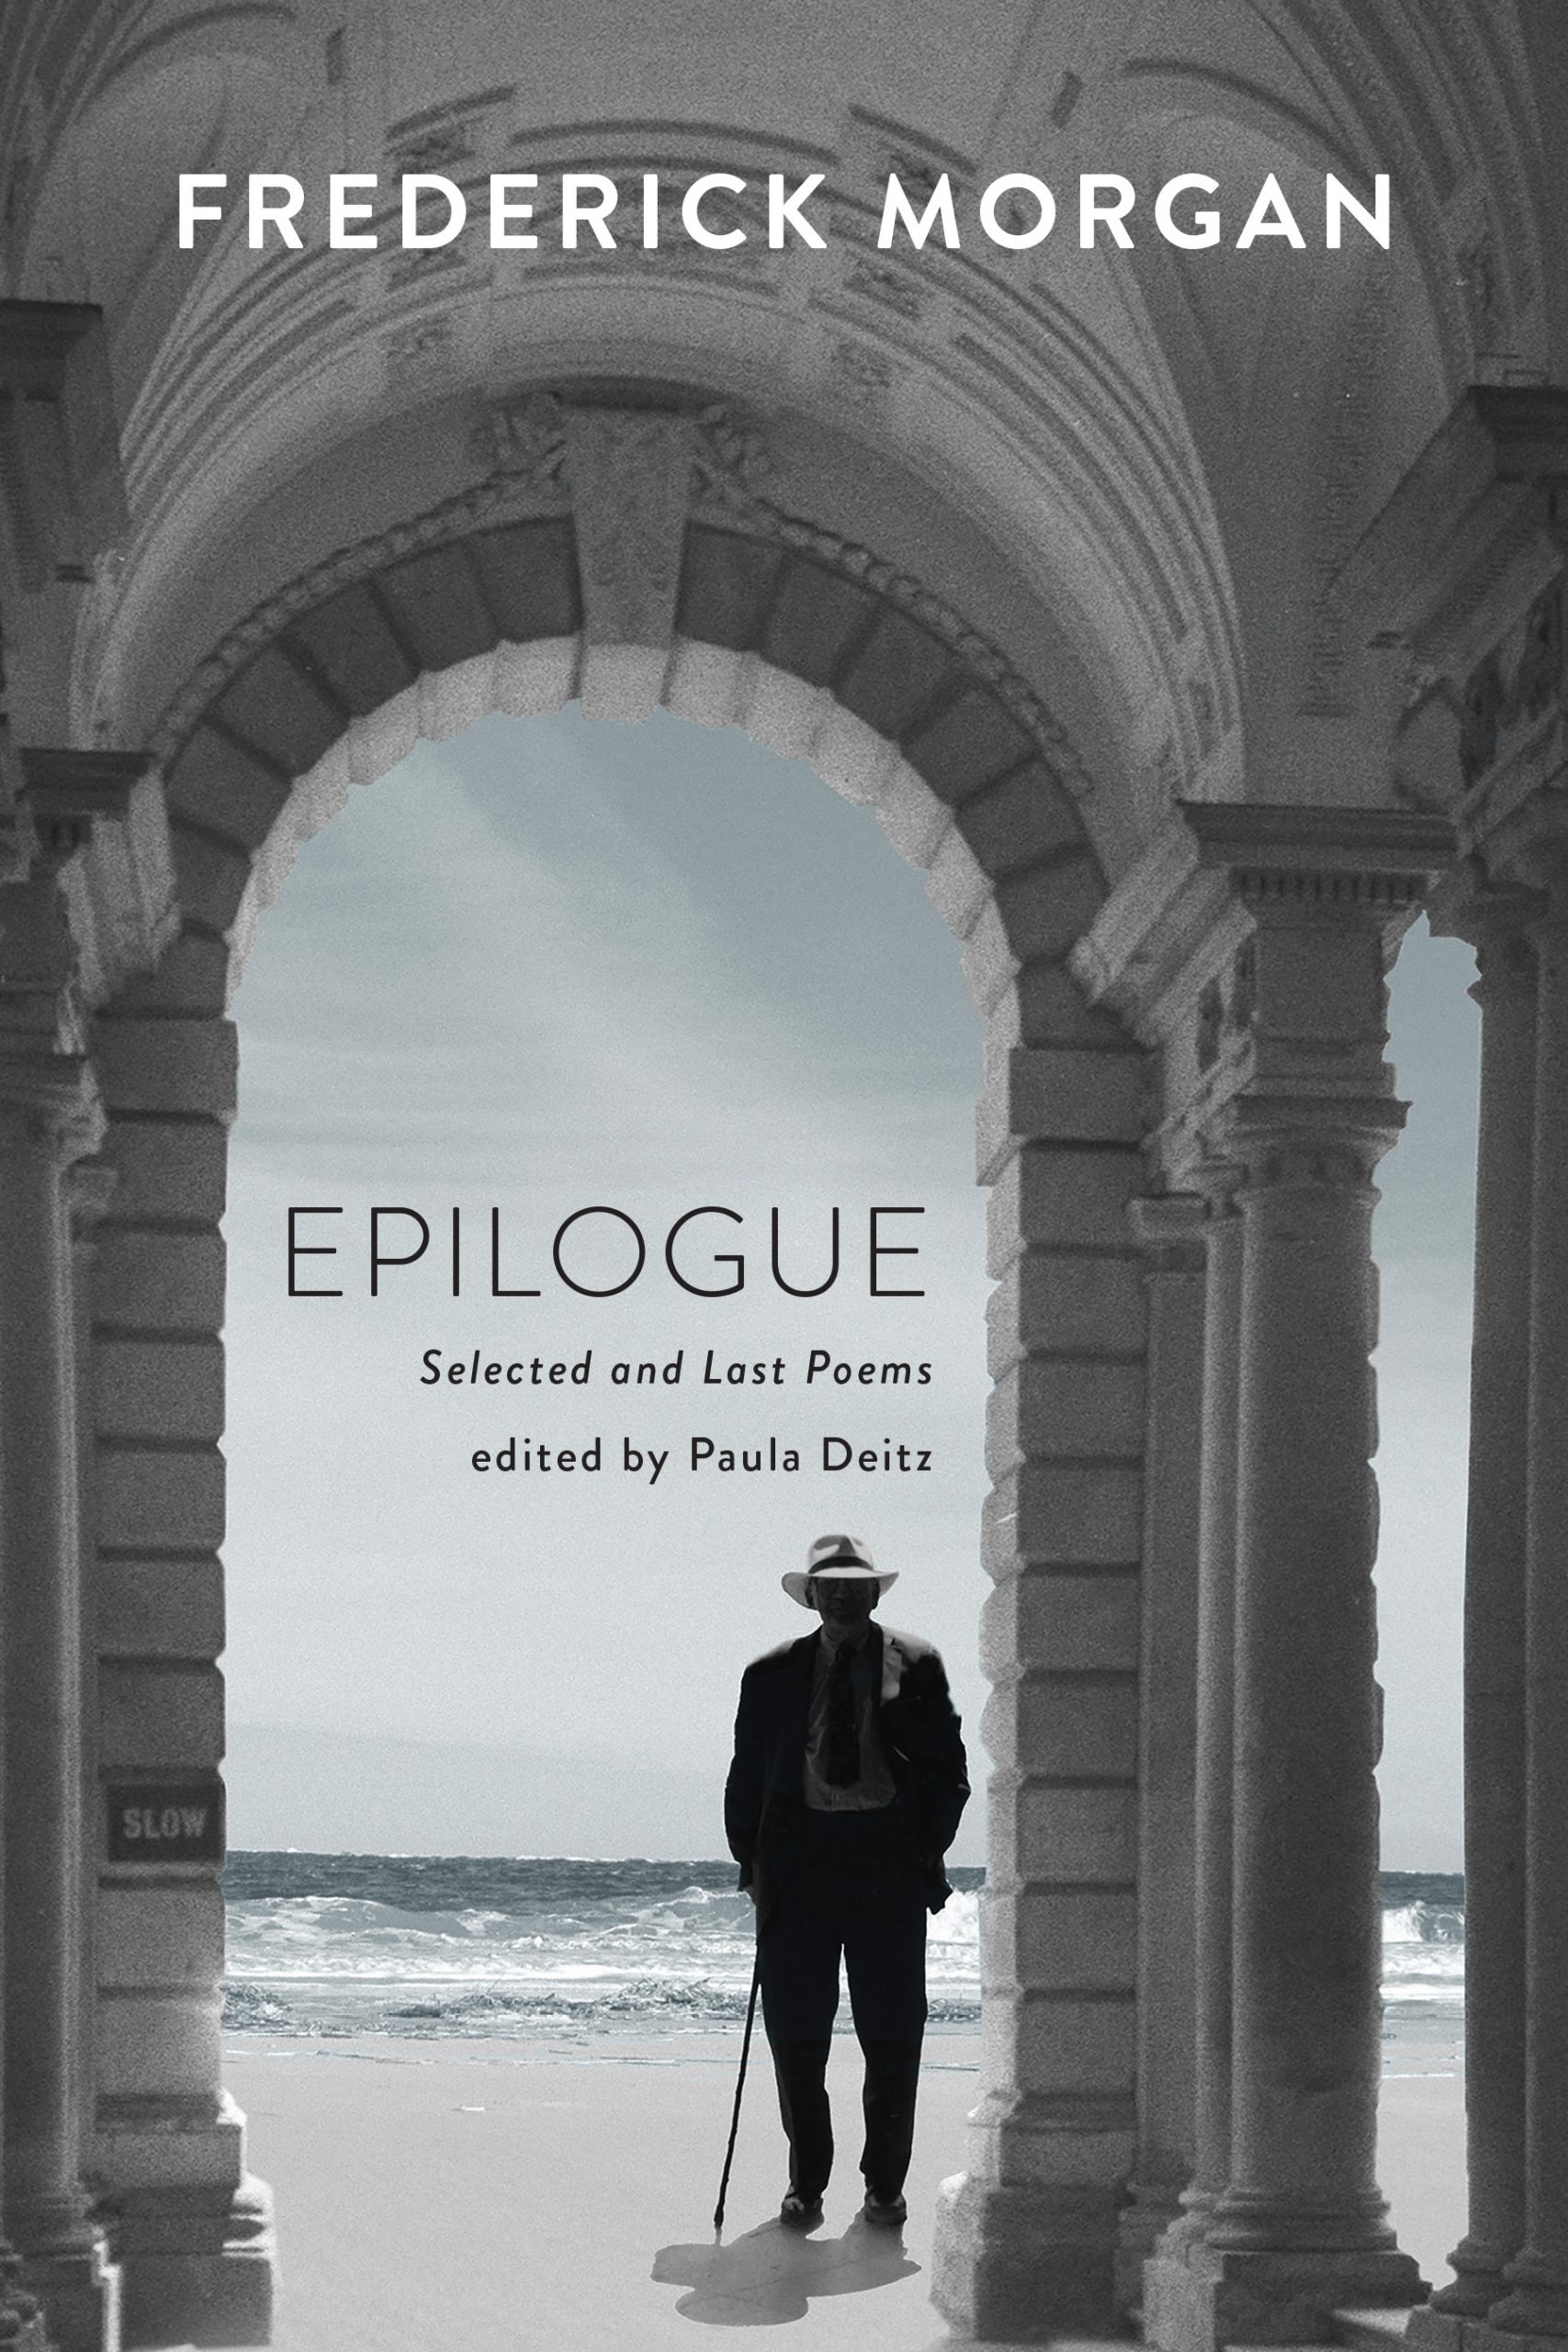 A photograph of a man in a suit with a hat and cane in silhouette standing beneath a marble arch on a beach, with white text stating "Frederick Morgan" and black text stating "Epilogue: Selected and Last Poems edited by Paula Dietz"